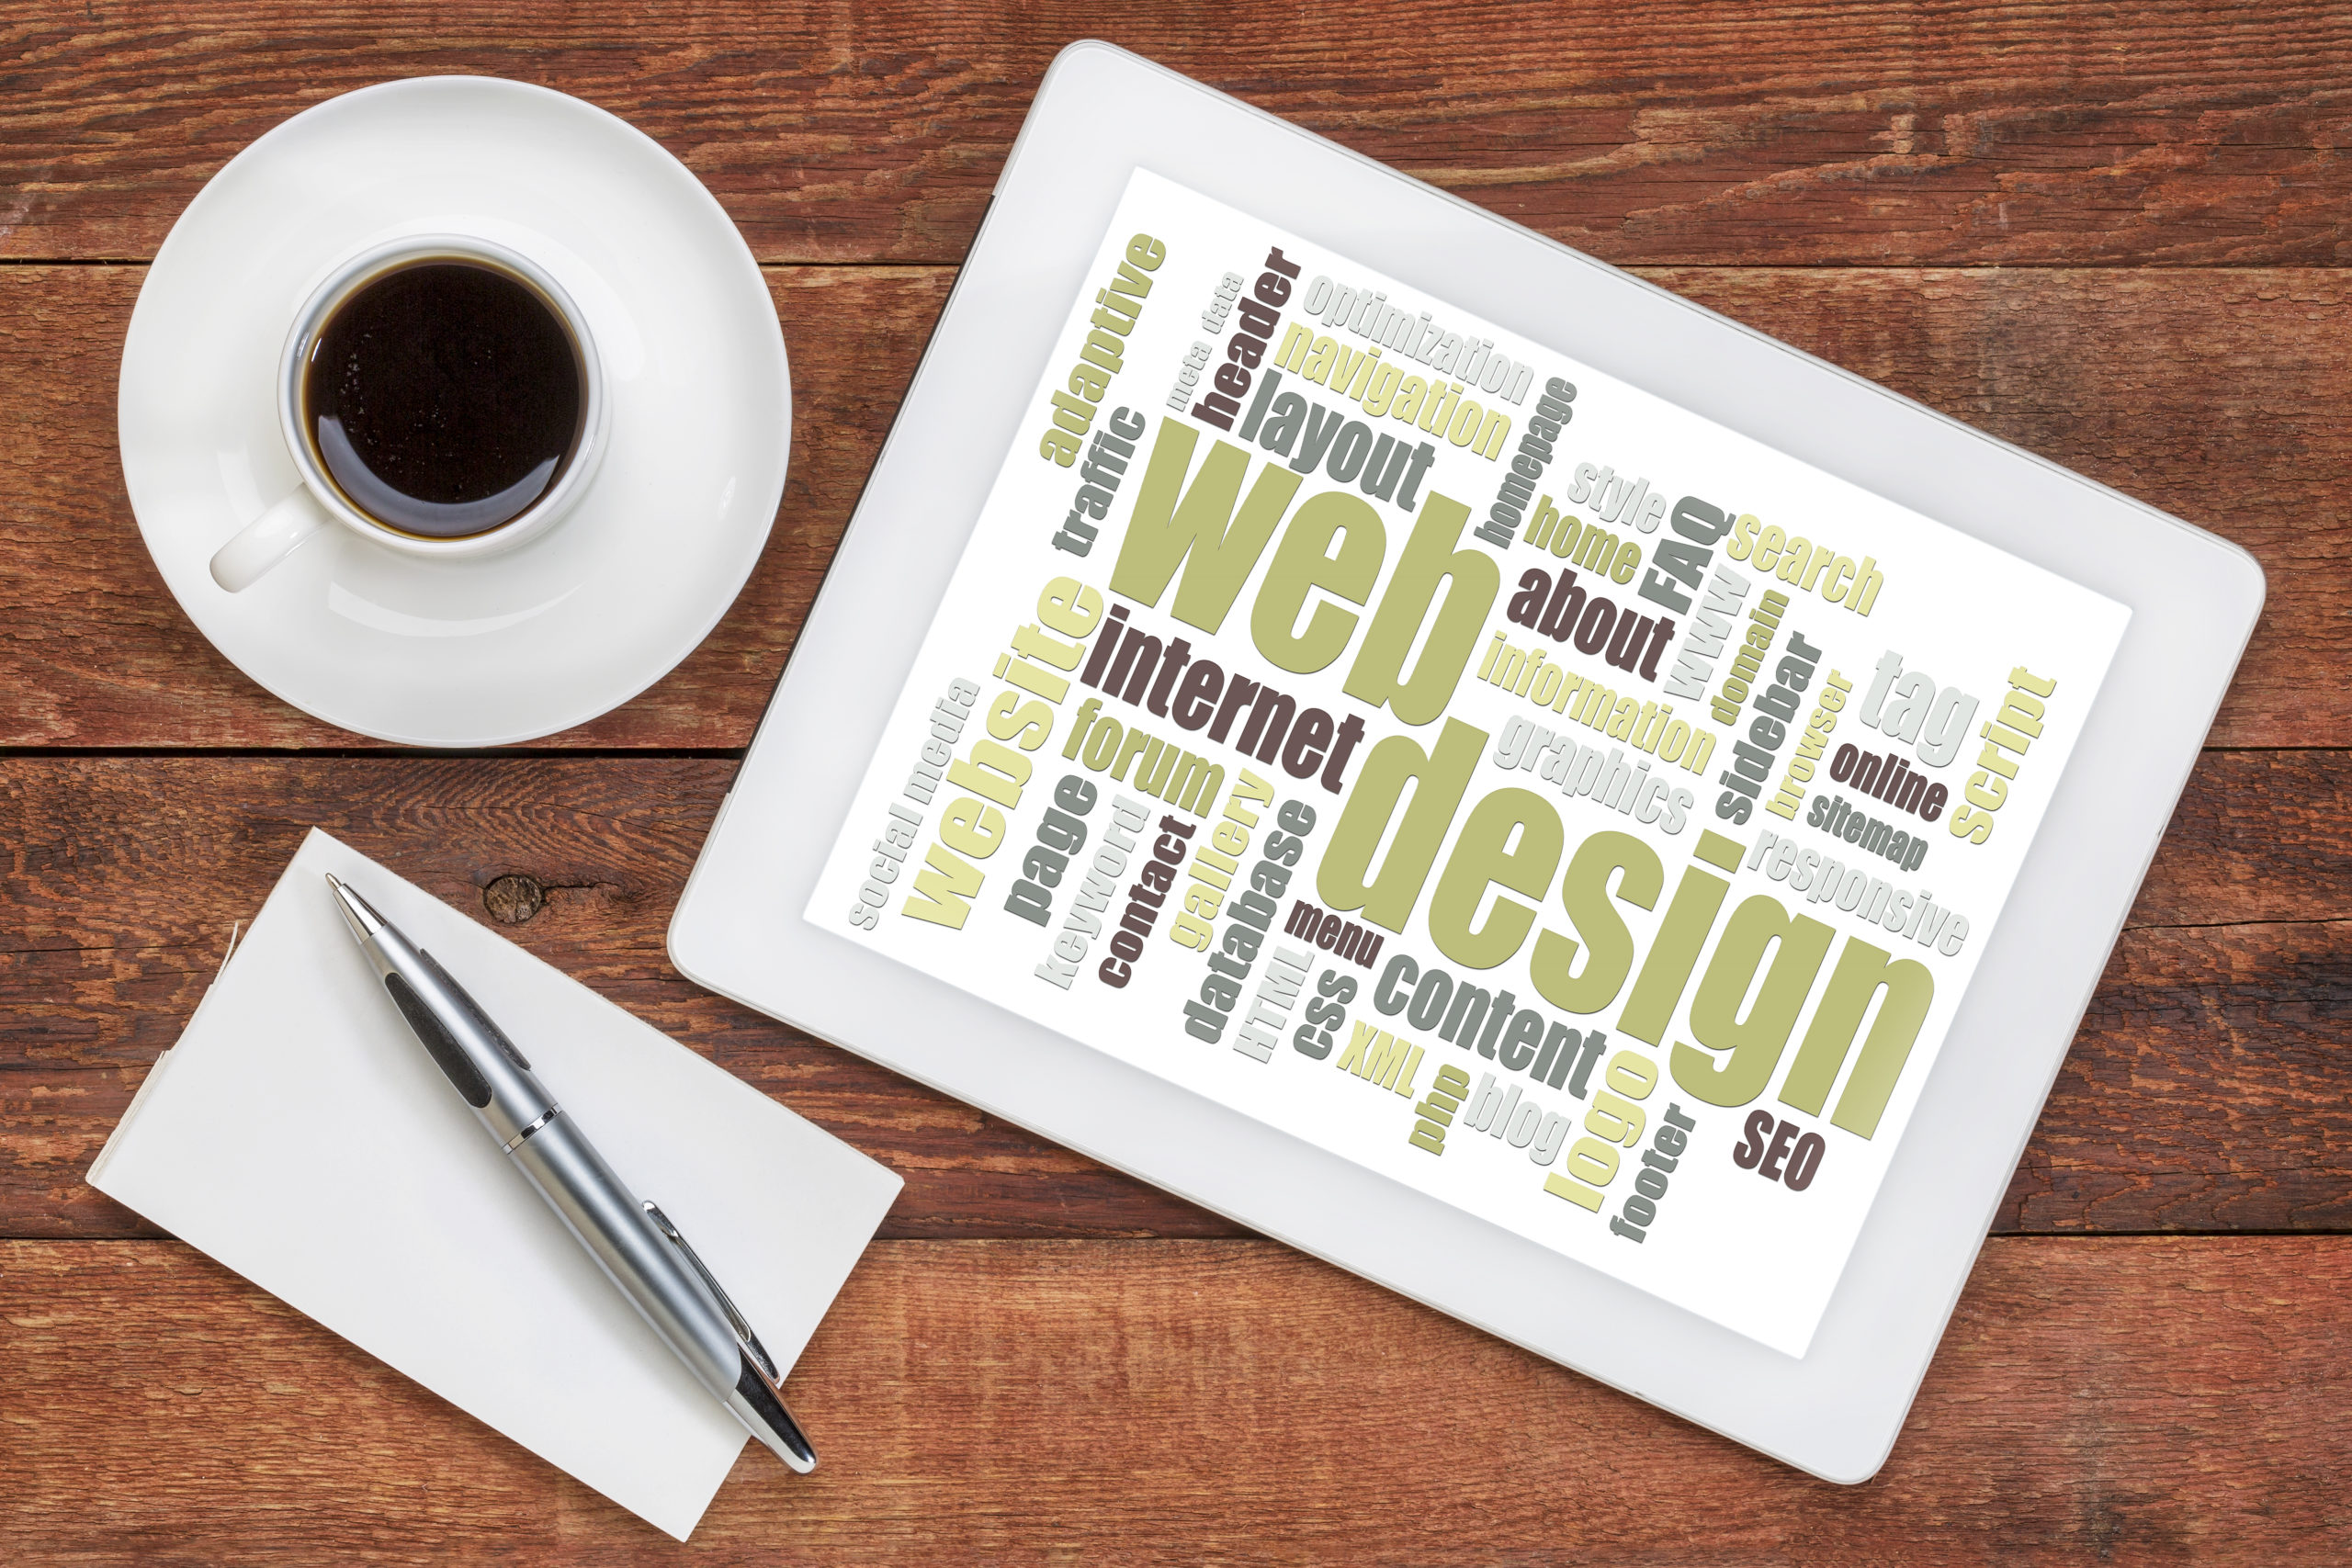 web design word cloud on a digital tablet with a cup of coffee on a rustic wooden table